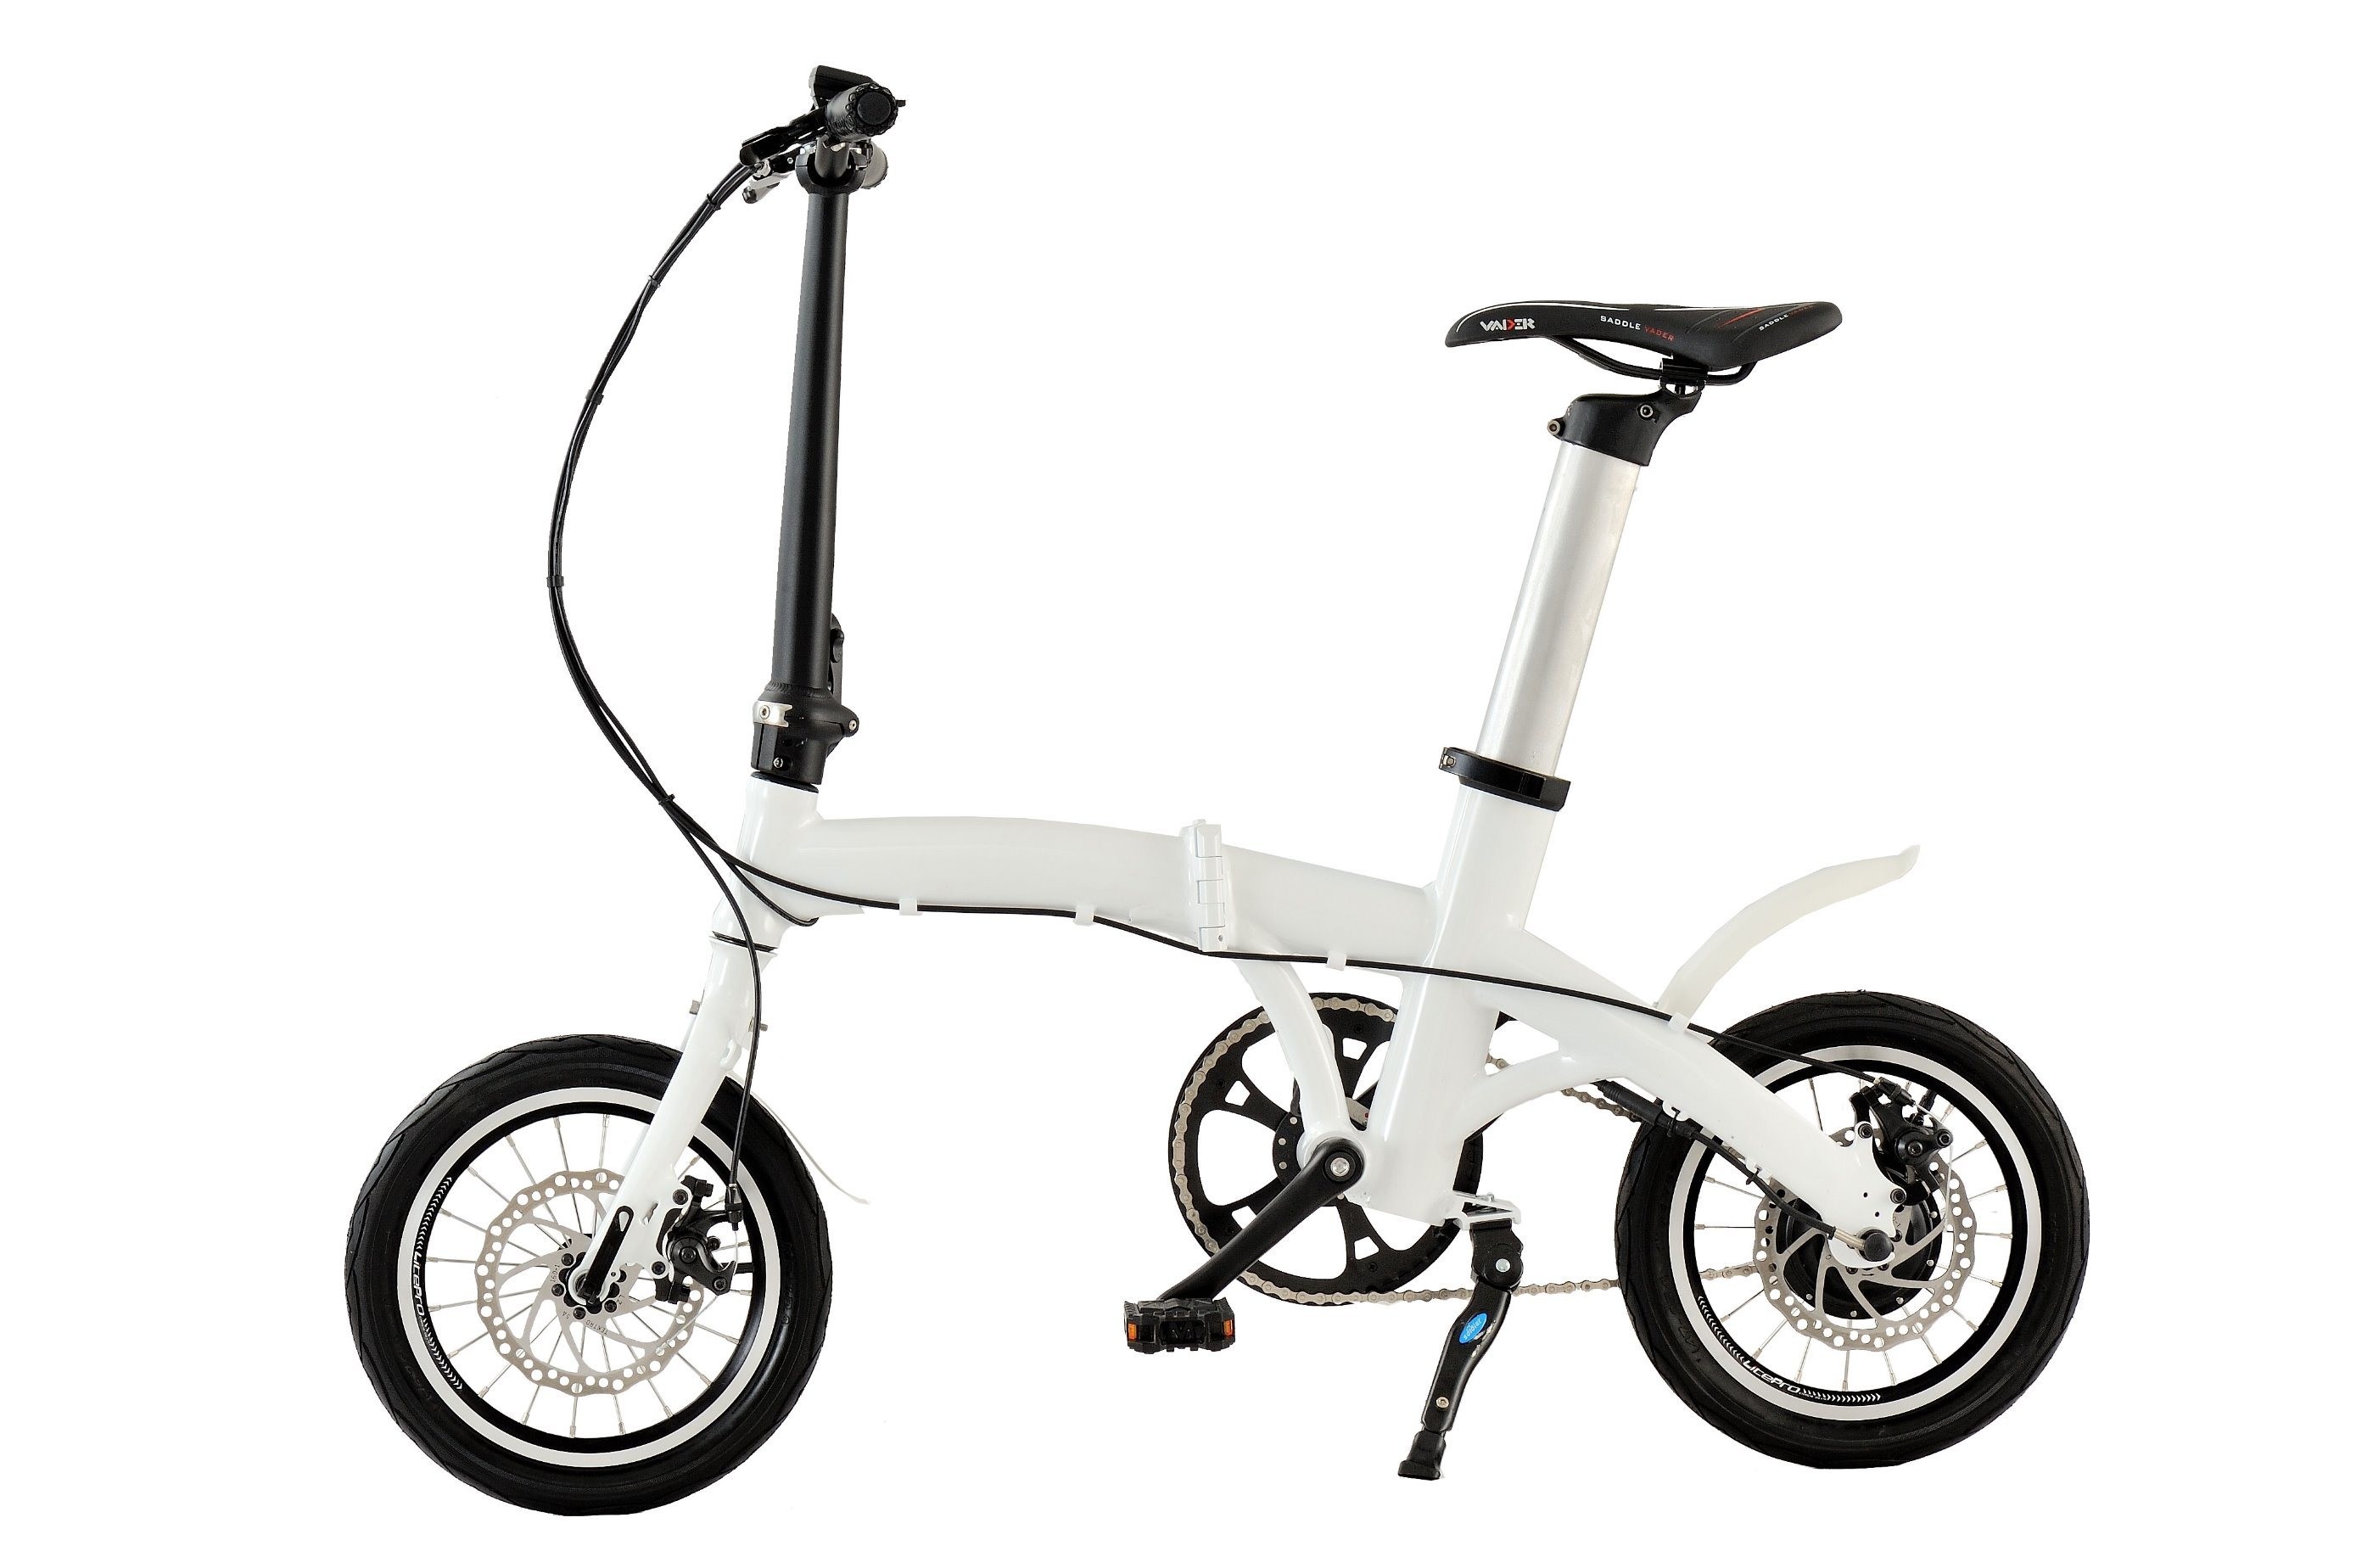 Cheap Small Volume Electric Mini Motor Bike 36V 200W Electric Scooter in Outdoor Electric Moped Sepeda Listrik with Comfort Seat